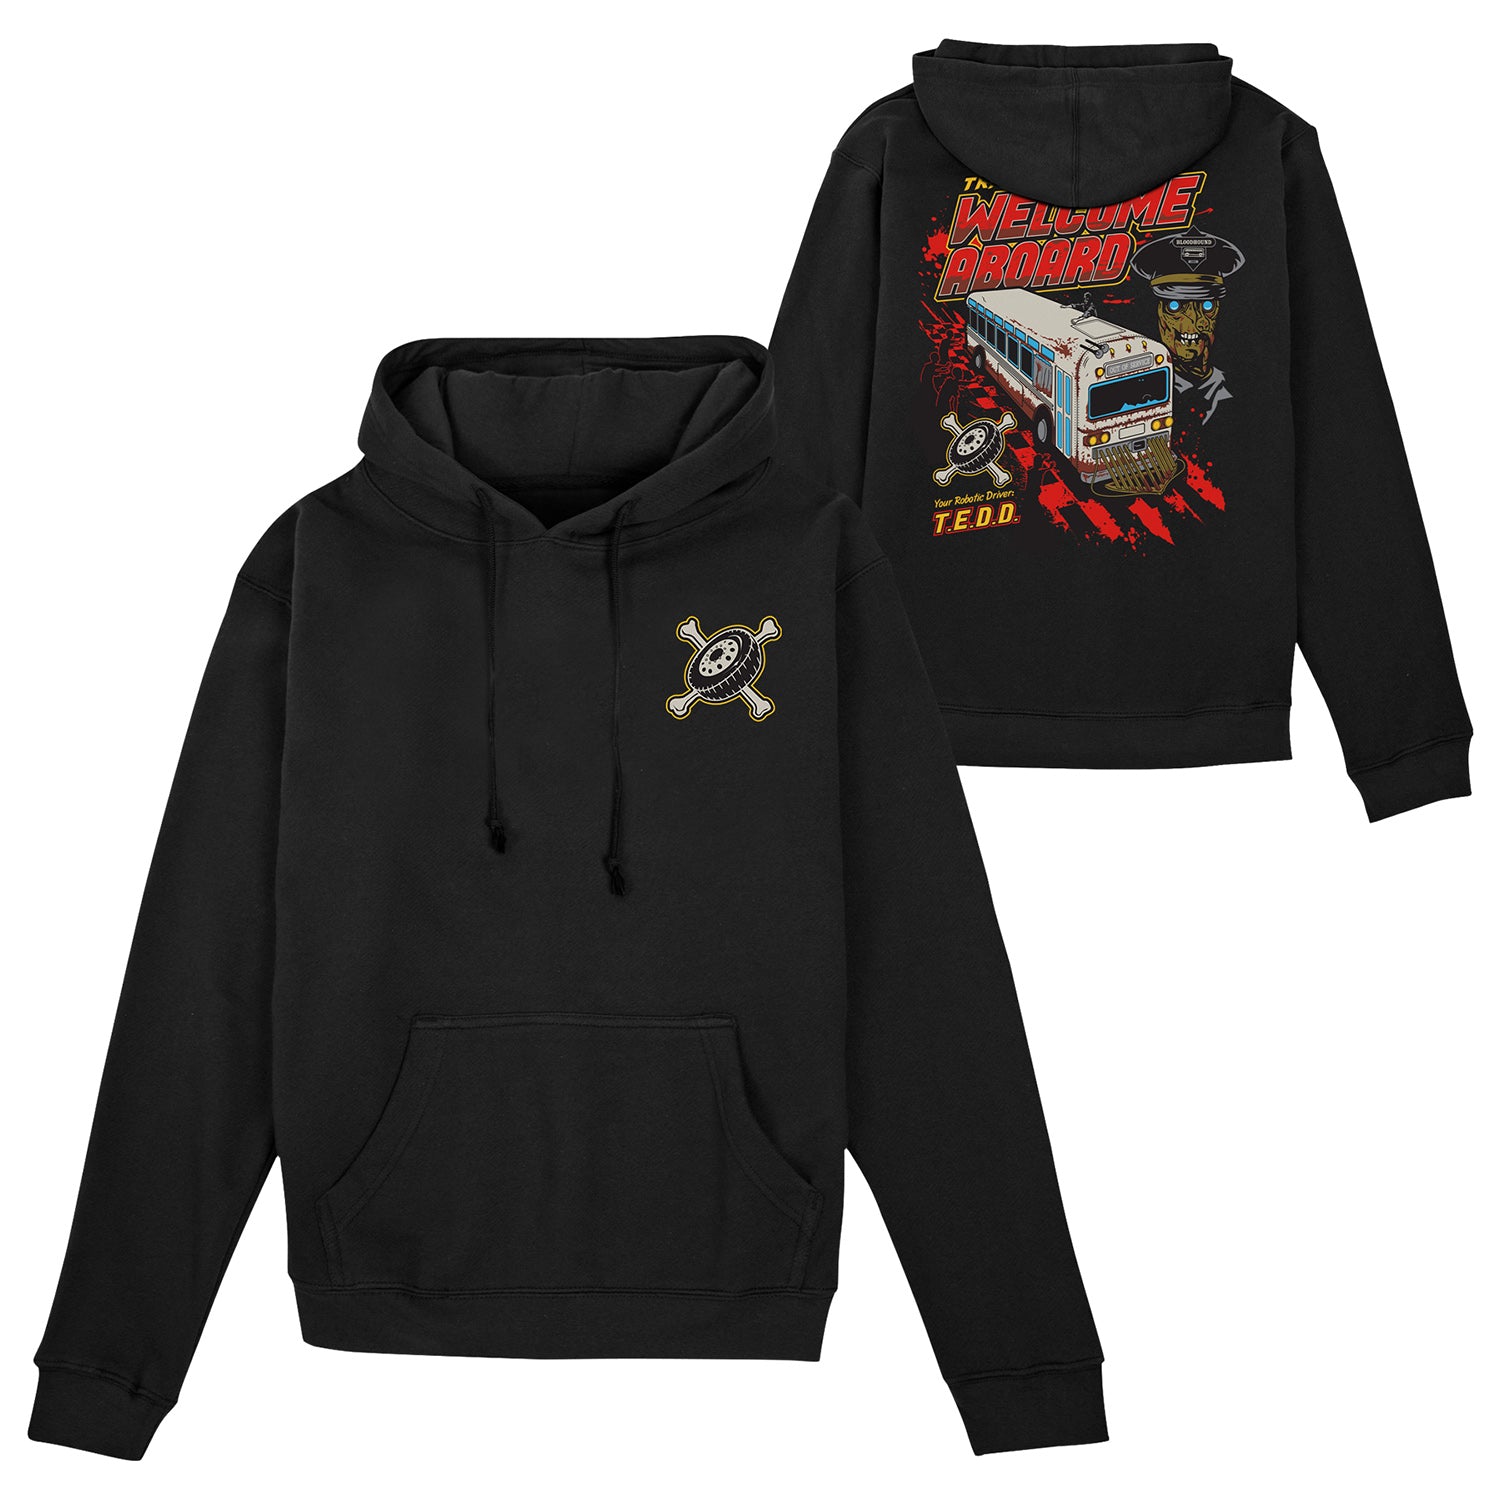 Call of Duty Tranzit Welcome Aboard Black Hoodie - Front and Back View